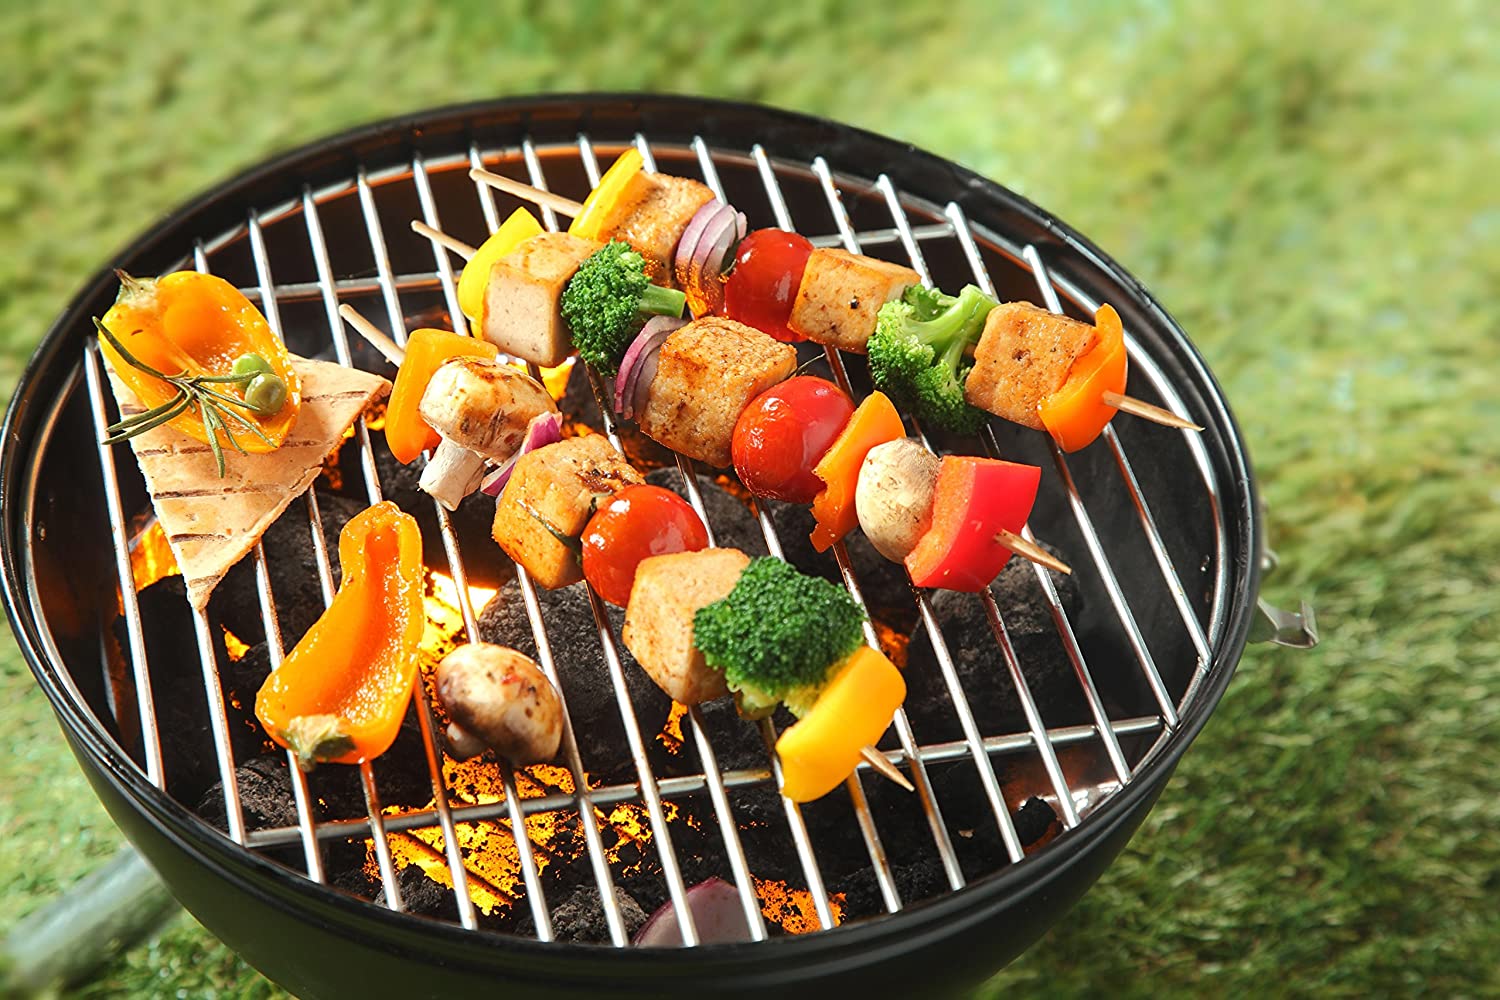 8 inch bamboo skewers being used to cook vegetables on a grill standing in the grass